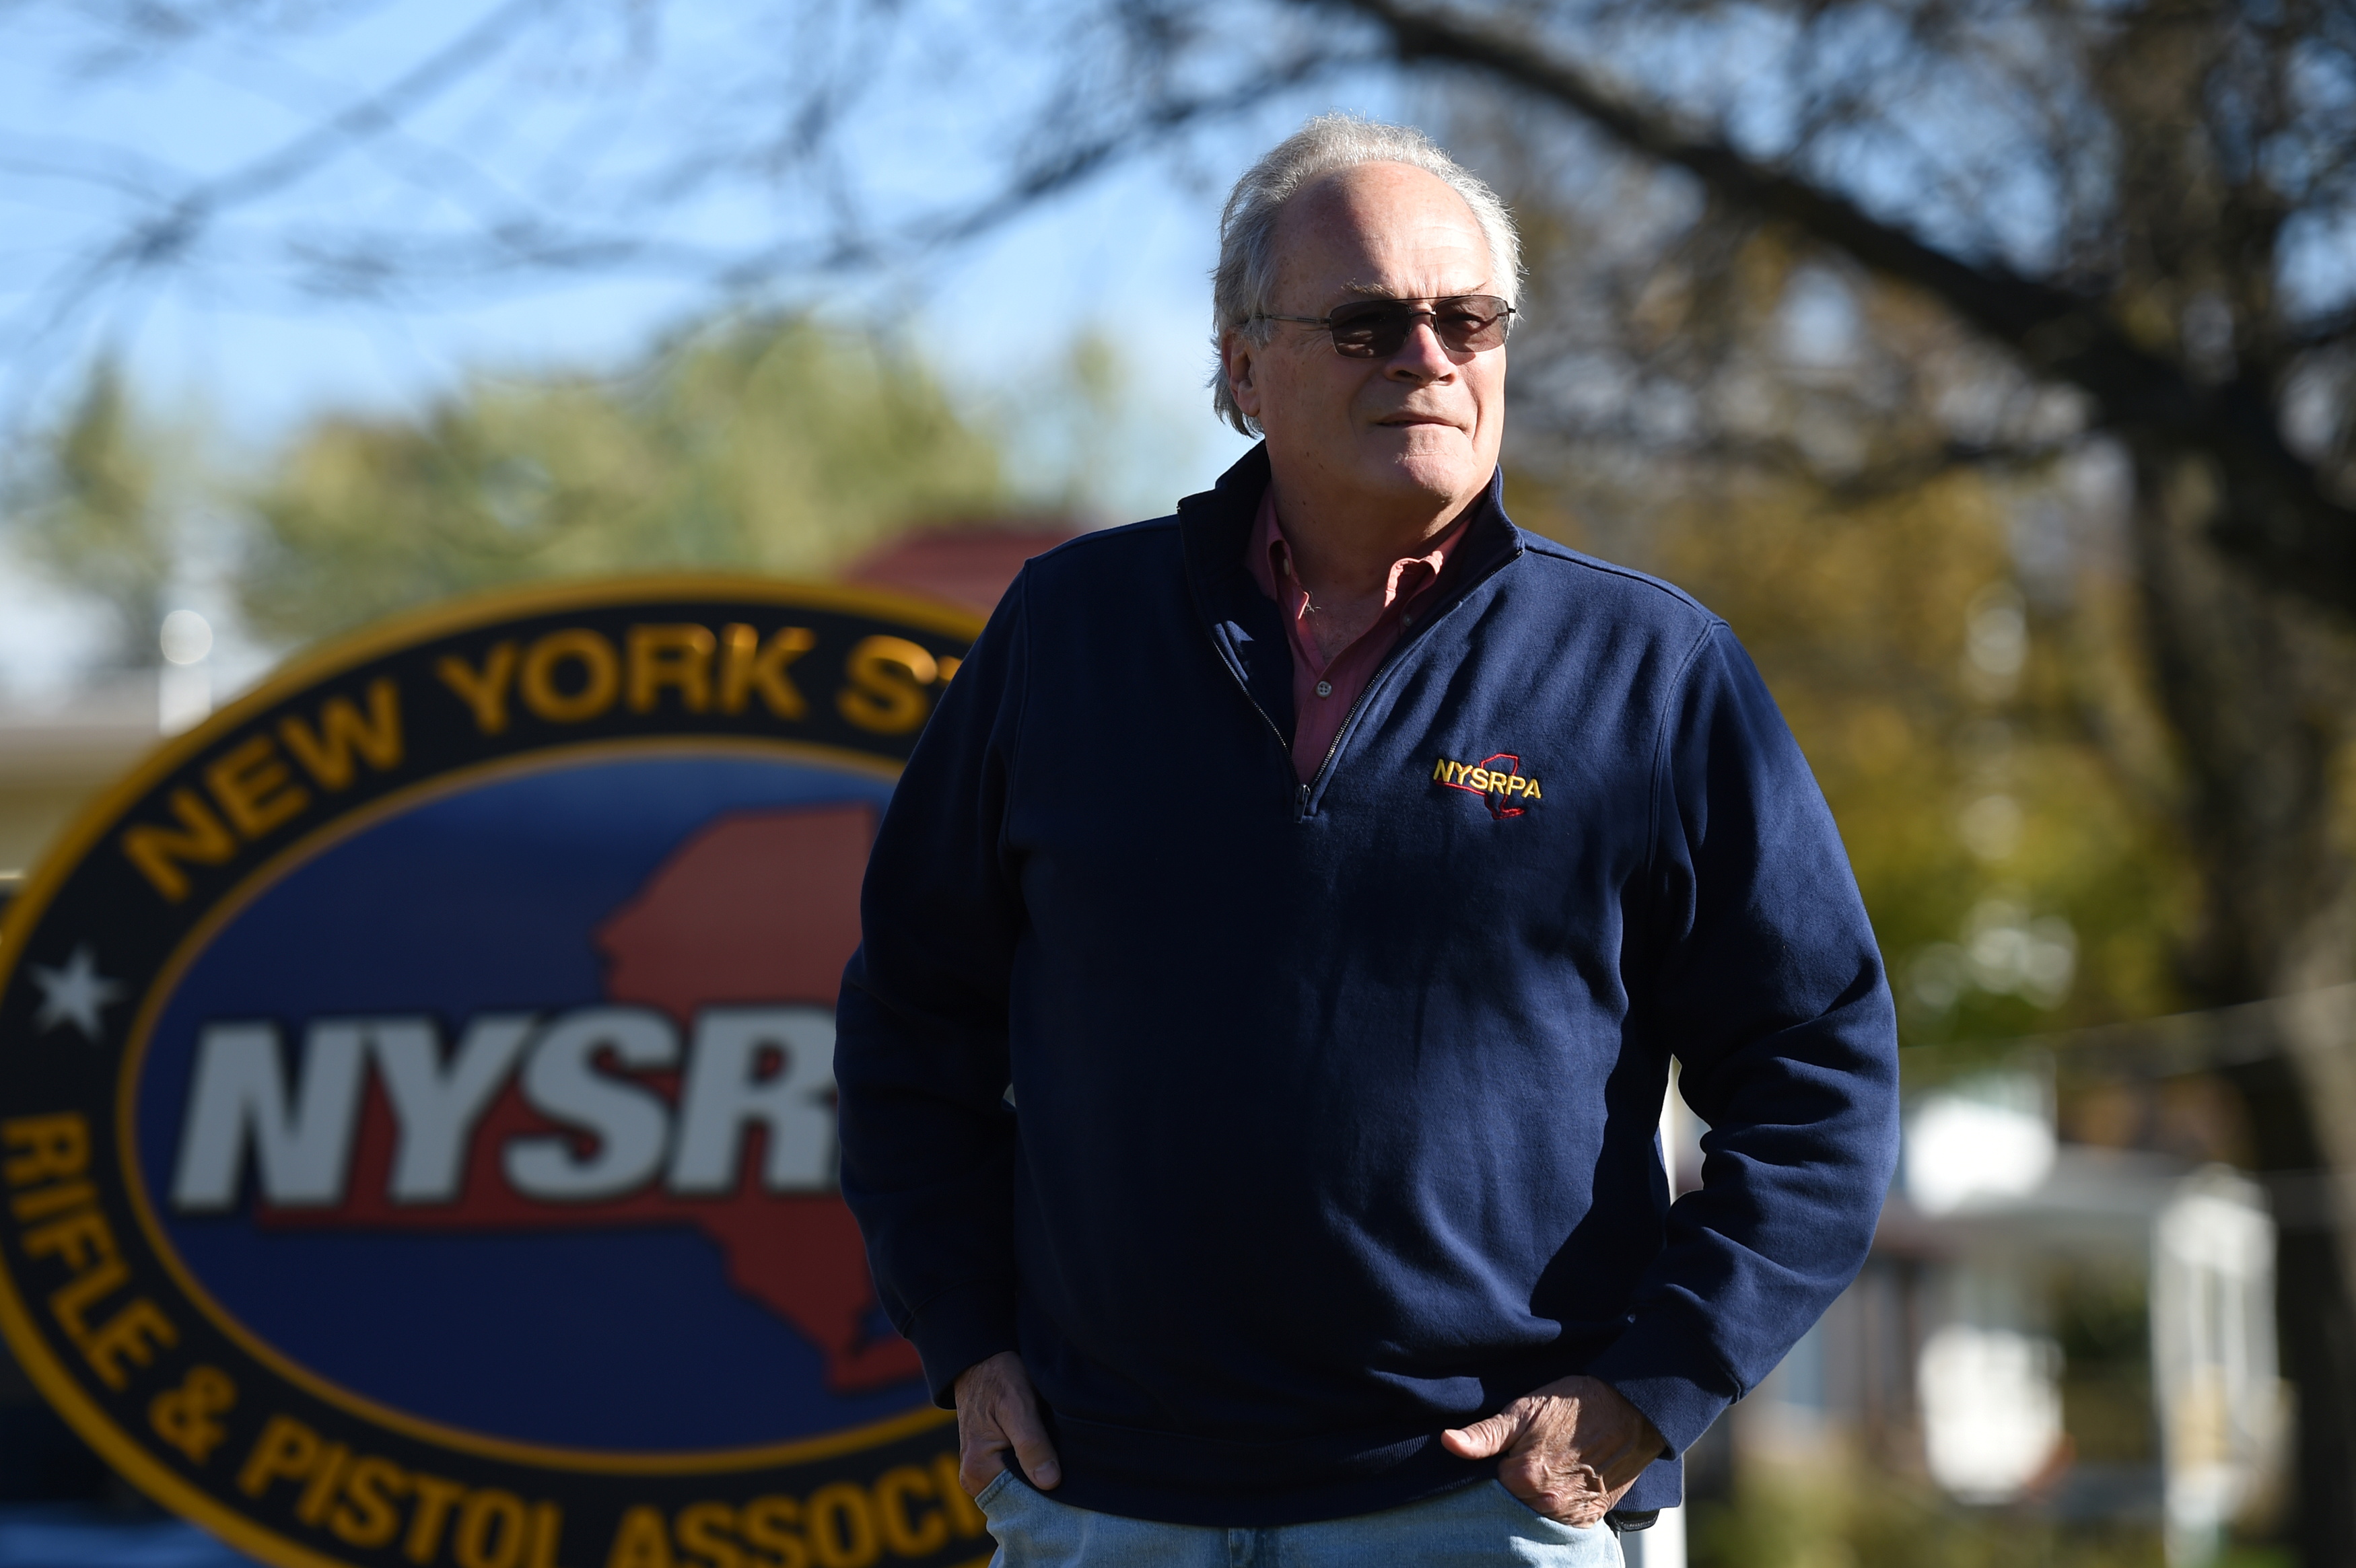 Tom King, head of the New York State Rifle and Pistol Association (NYSRPA), and a challenger in a case being heard by the U.S. Supreme Court with regards to the right to carry handguns in public, poses at the NYSRPA office in East Greenbush, New York, U.S. October 20, 2021. REUTERS/Cindy Schultz